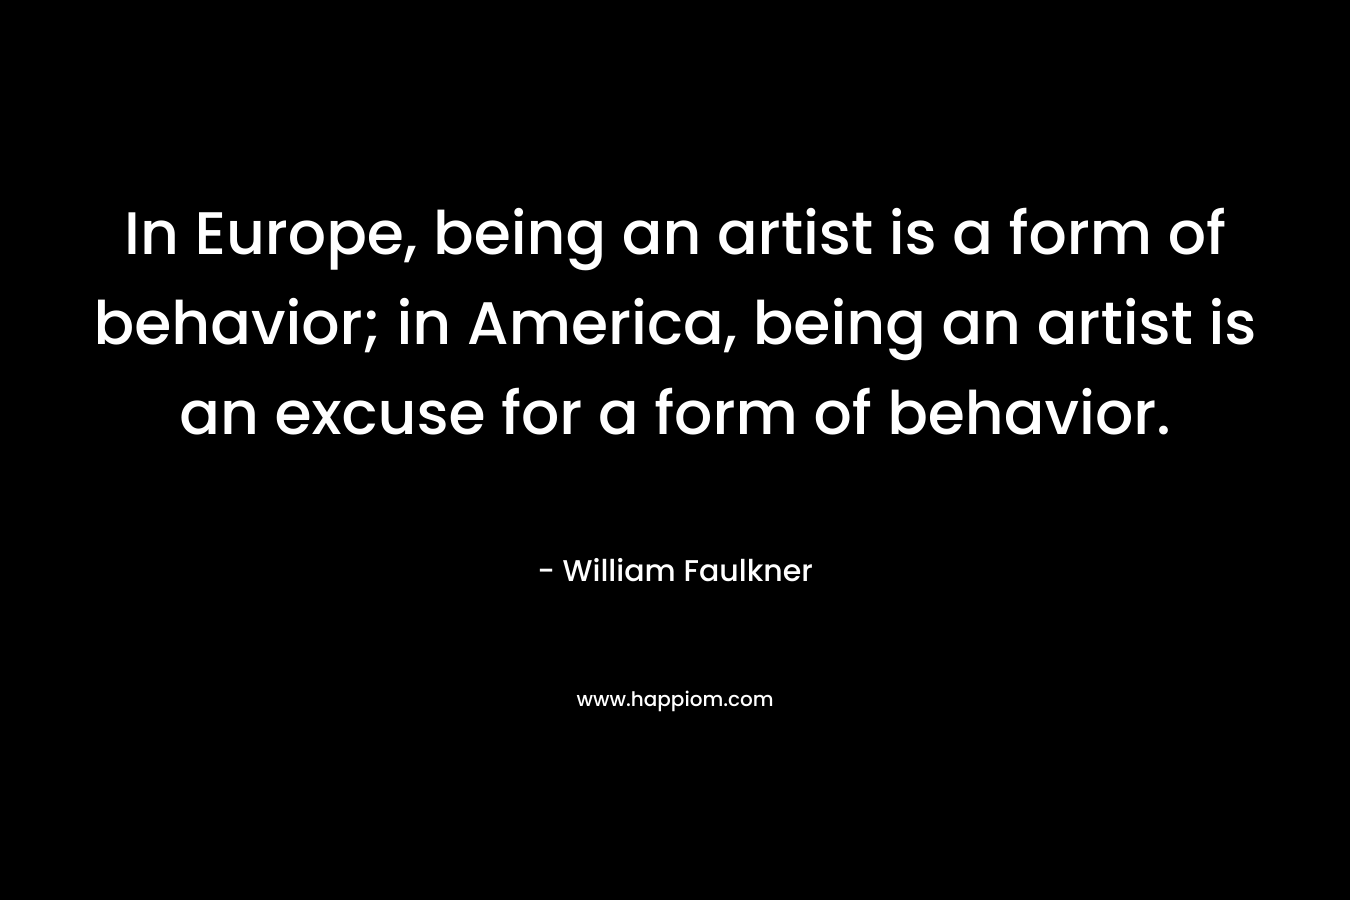 In Europe, being an artist is a form of behavior; in America, being an artist is an excuse for a form of behavior.